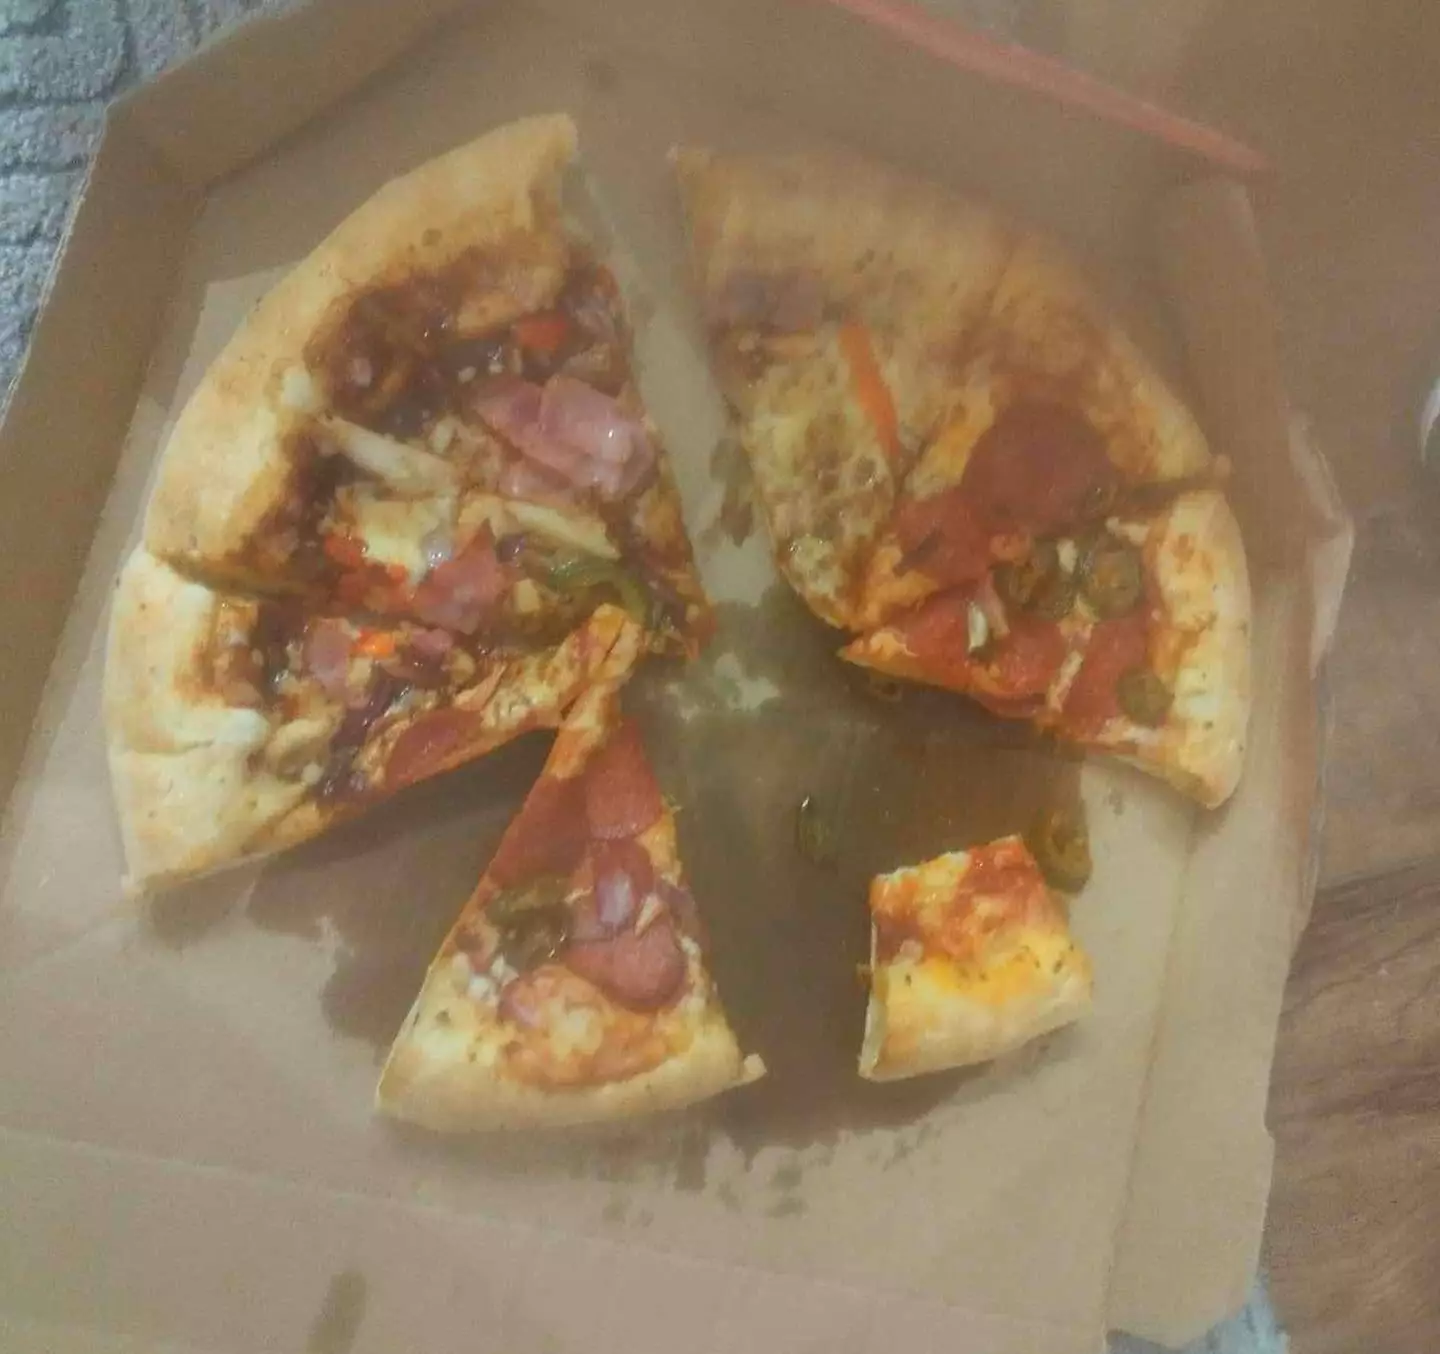 The pizza was missing a few slices.